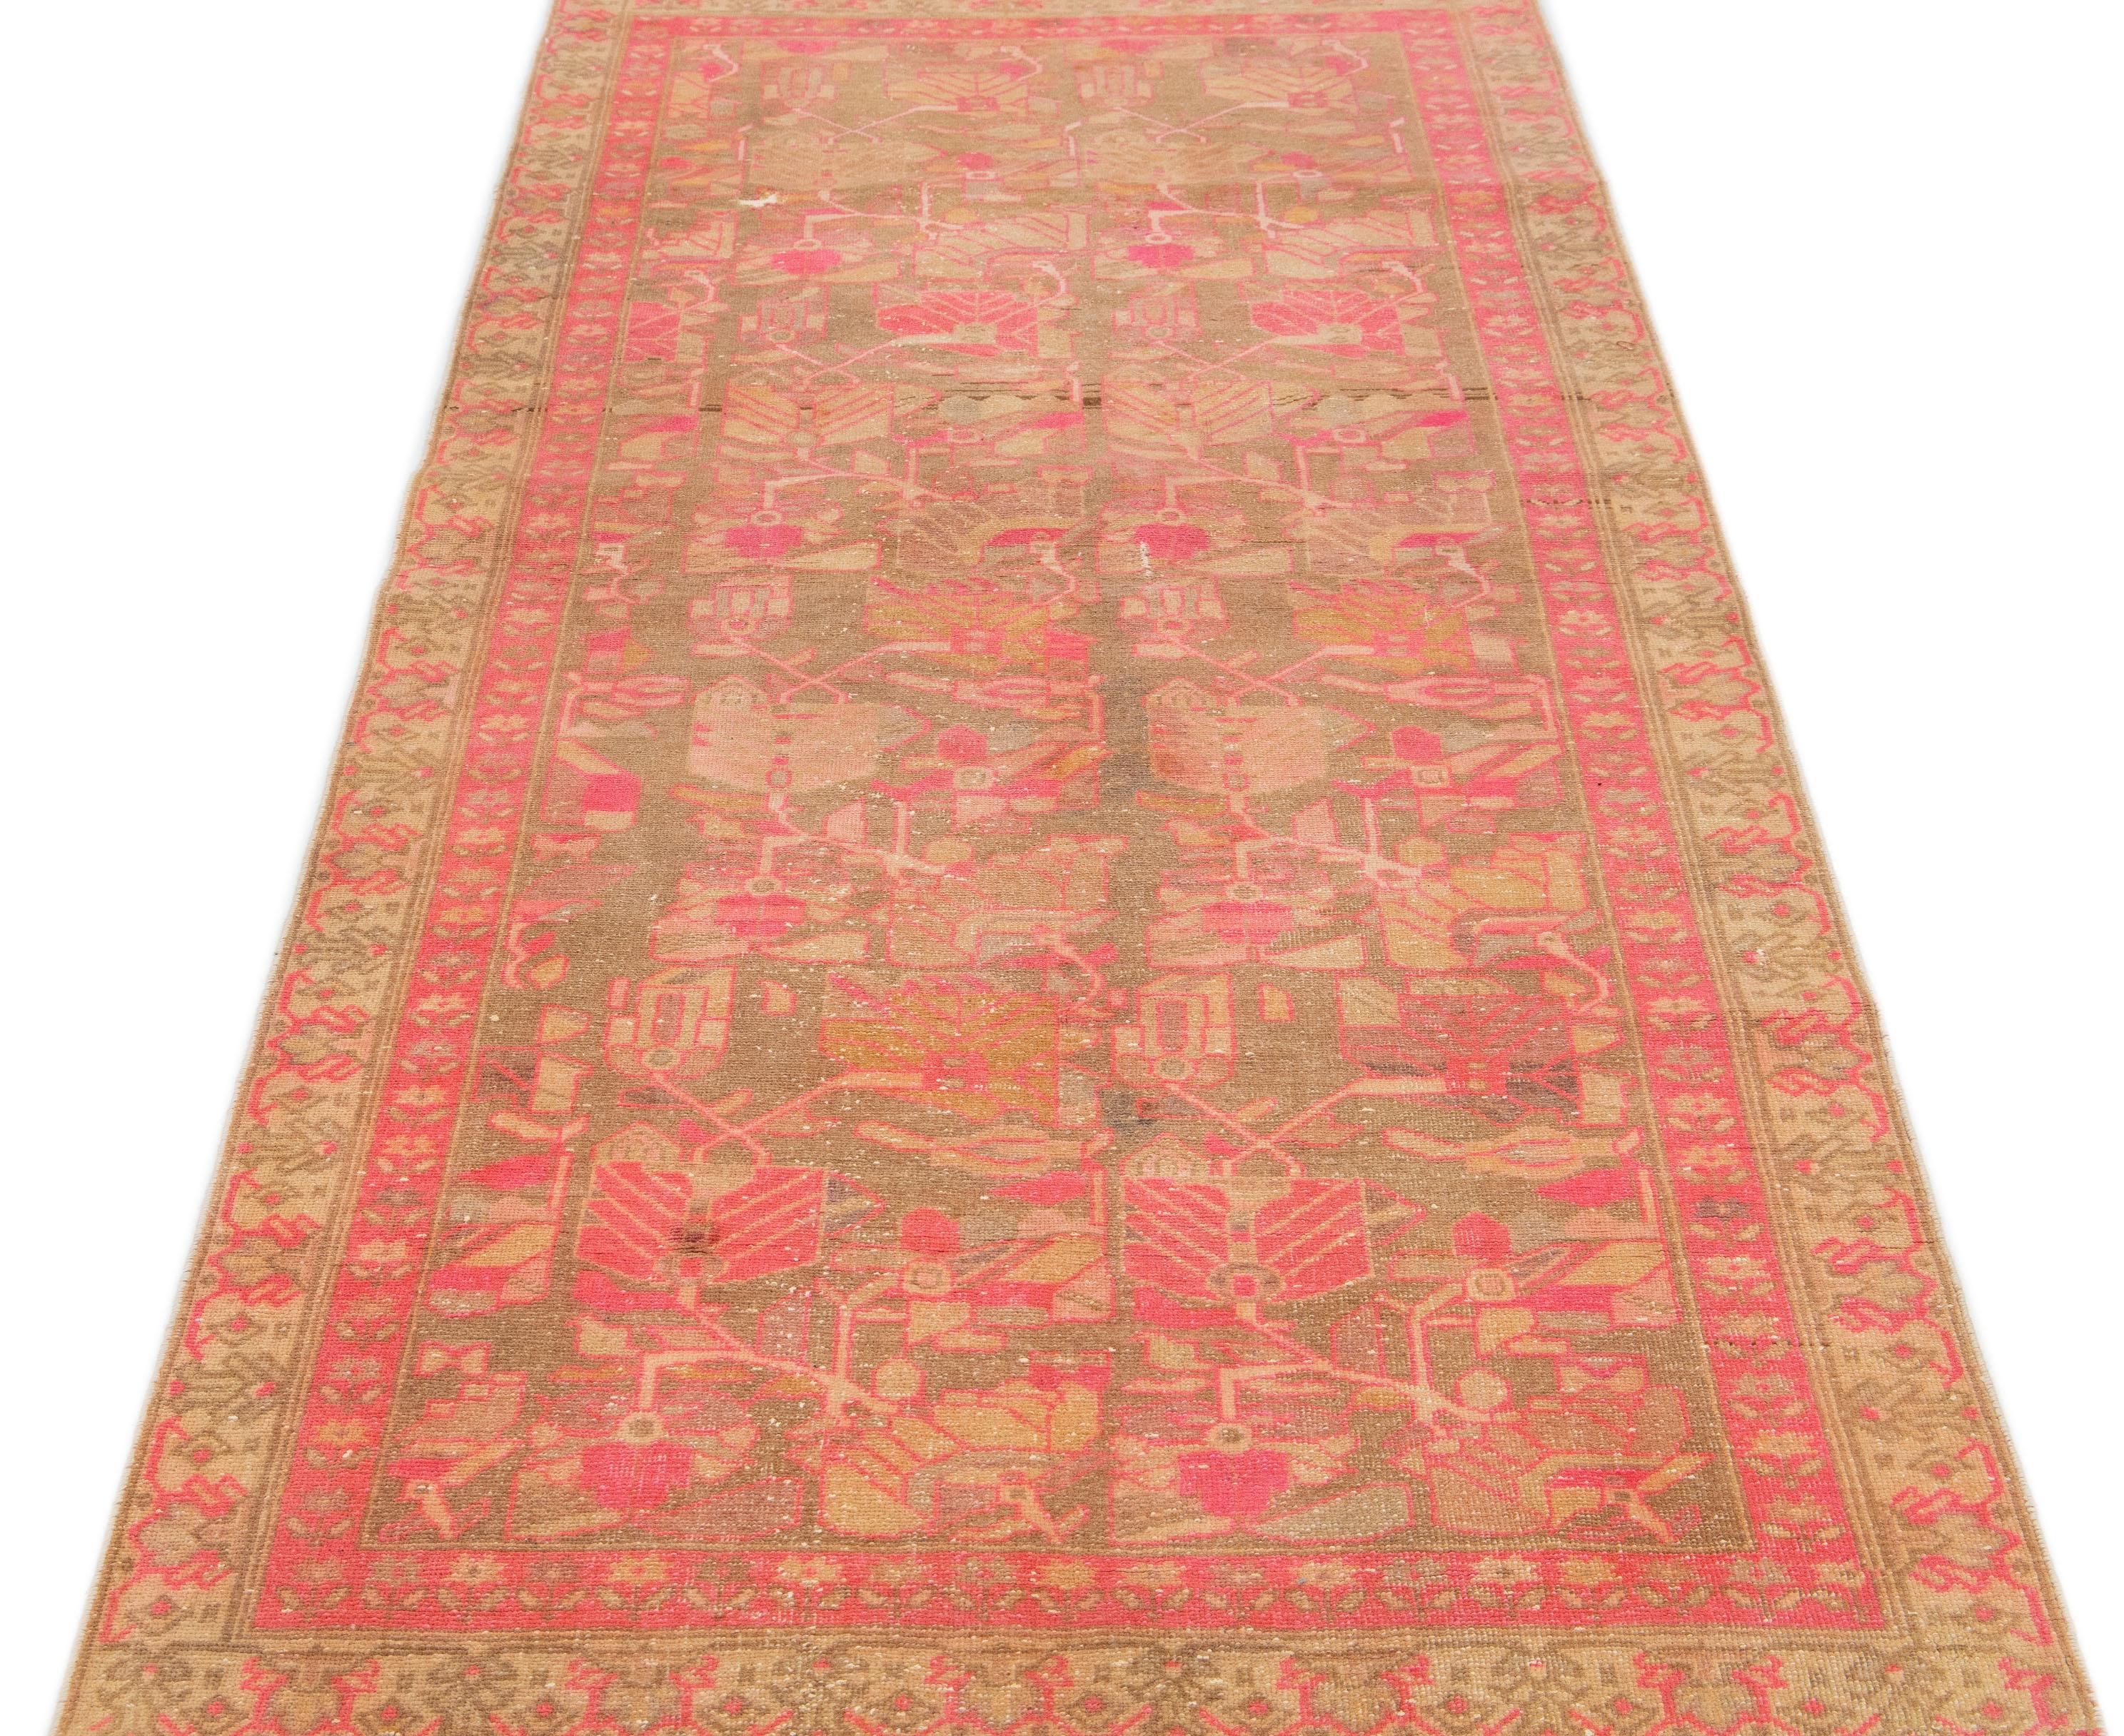 This lovely antique Malayer wool rug is hand-knotted and boasts a charming brown color field. It has a stunning floral pattern design with delightful pink and orange accents.

This rug measures 4' x 9'4